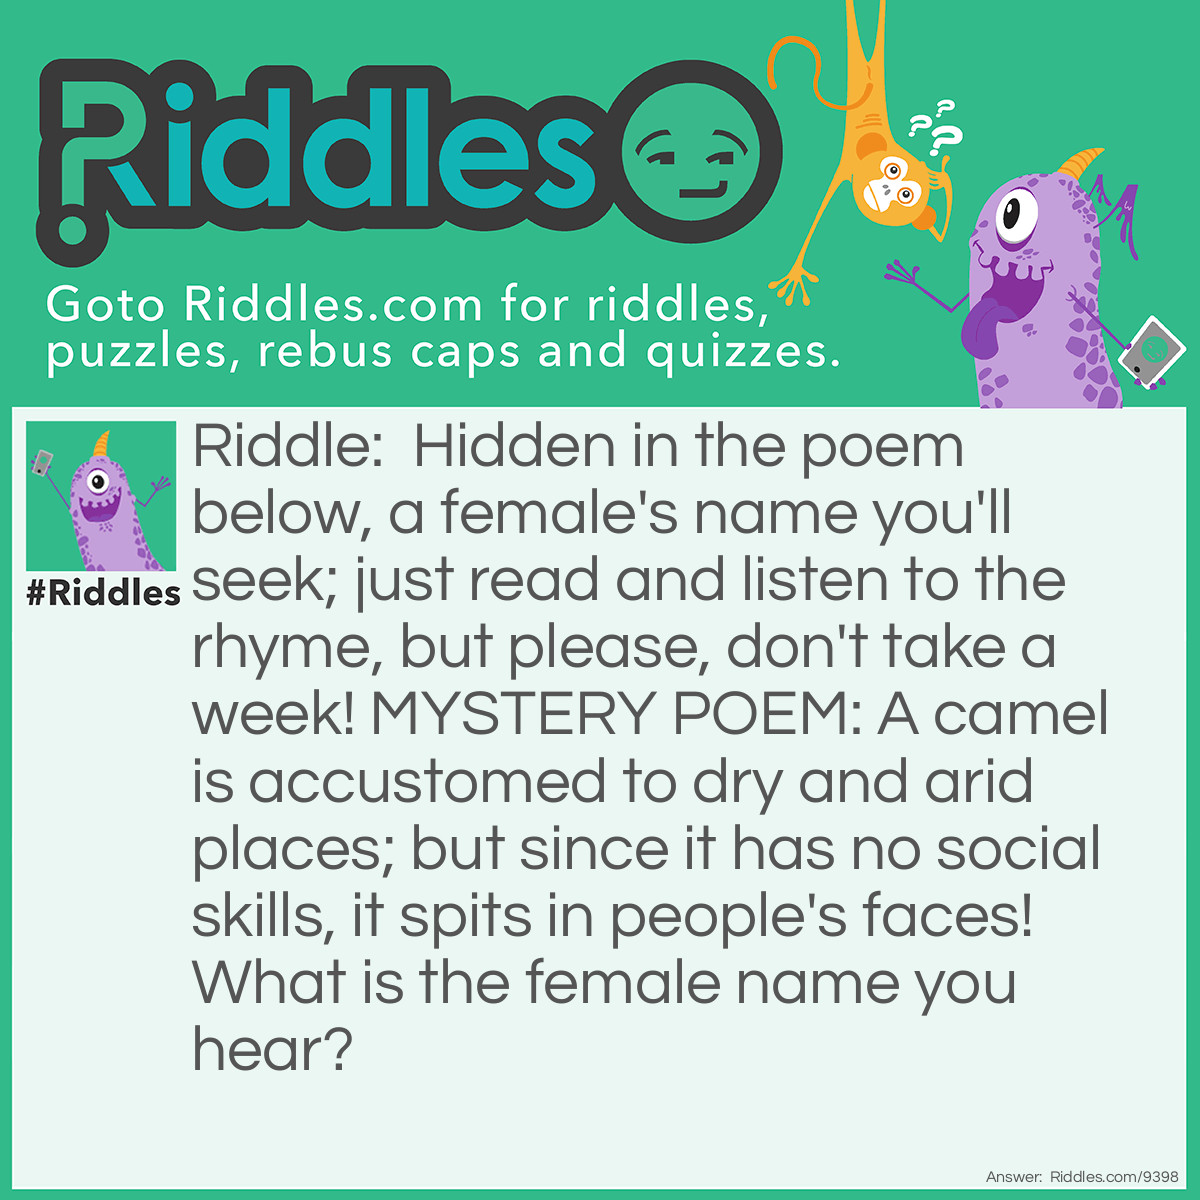 Riddle: Hidden in the poem below, a female's name you'll seek; just read and listen to the rhyme, but please, don't take a week! MYSTERY POEM: A camel is accustomed to dry and arid places; but since it has no social skills, it spits in people's faces! What is the female name you hear? Answer: MELISSA.